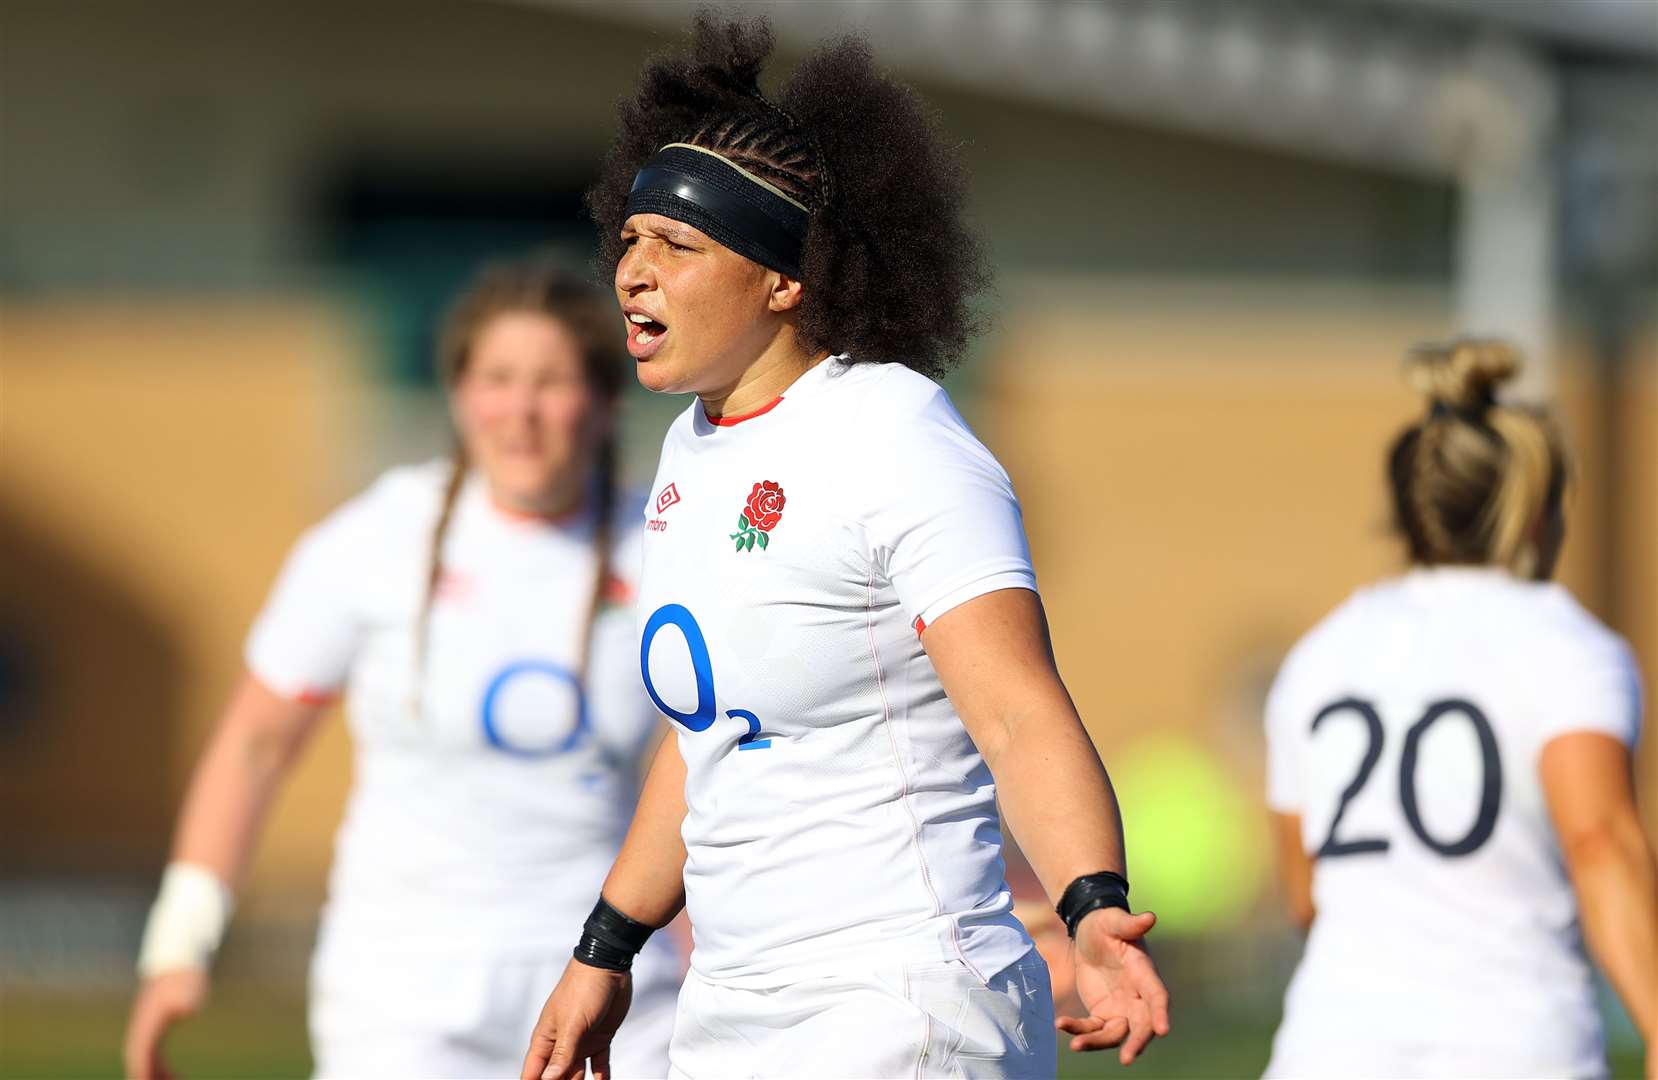 Medway's Shaunagh Brown suffered Women's Rugby World Cup final weekend heartache. Picture: Naomi Baker/The RFU